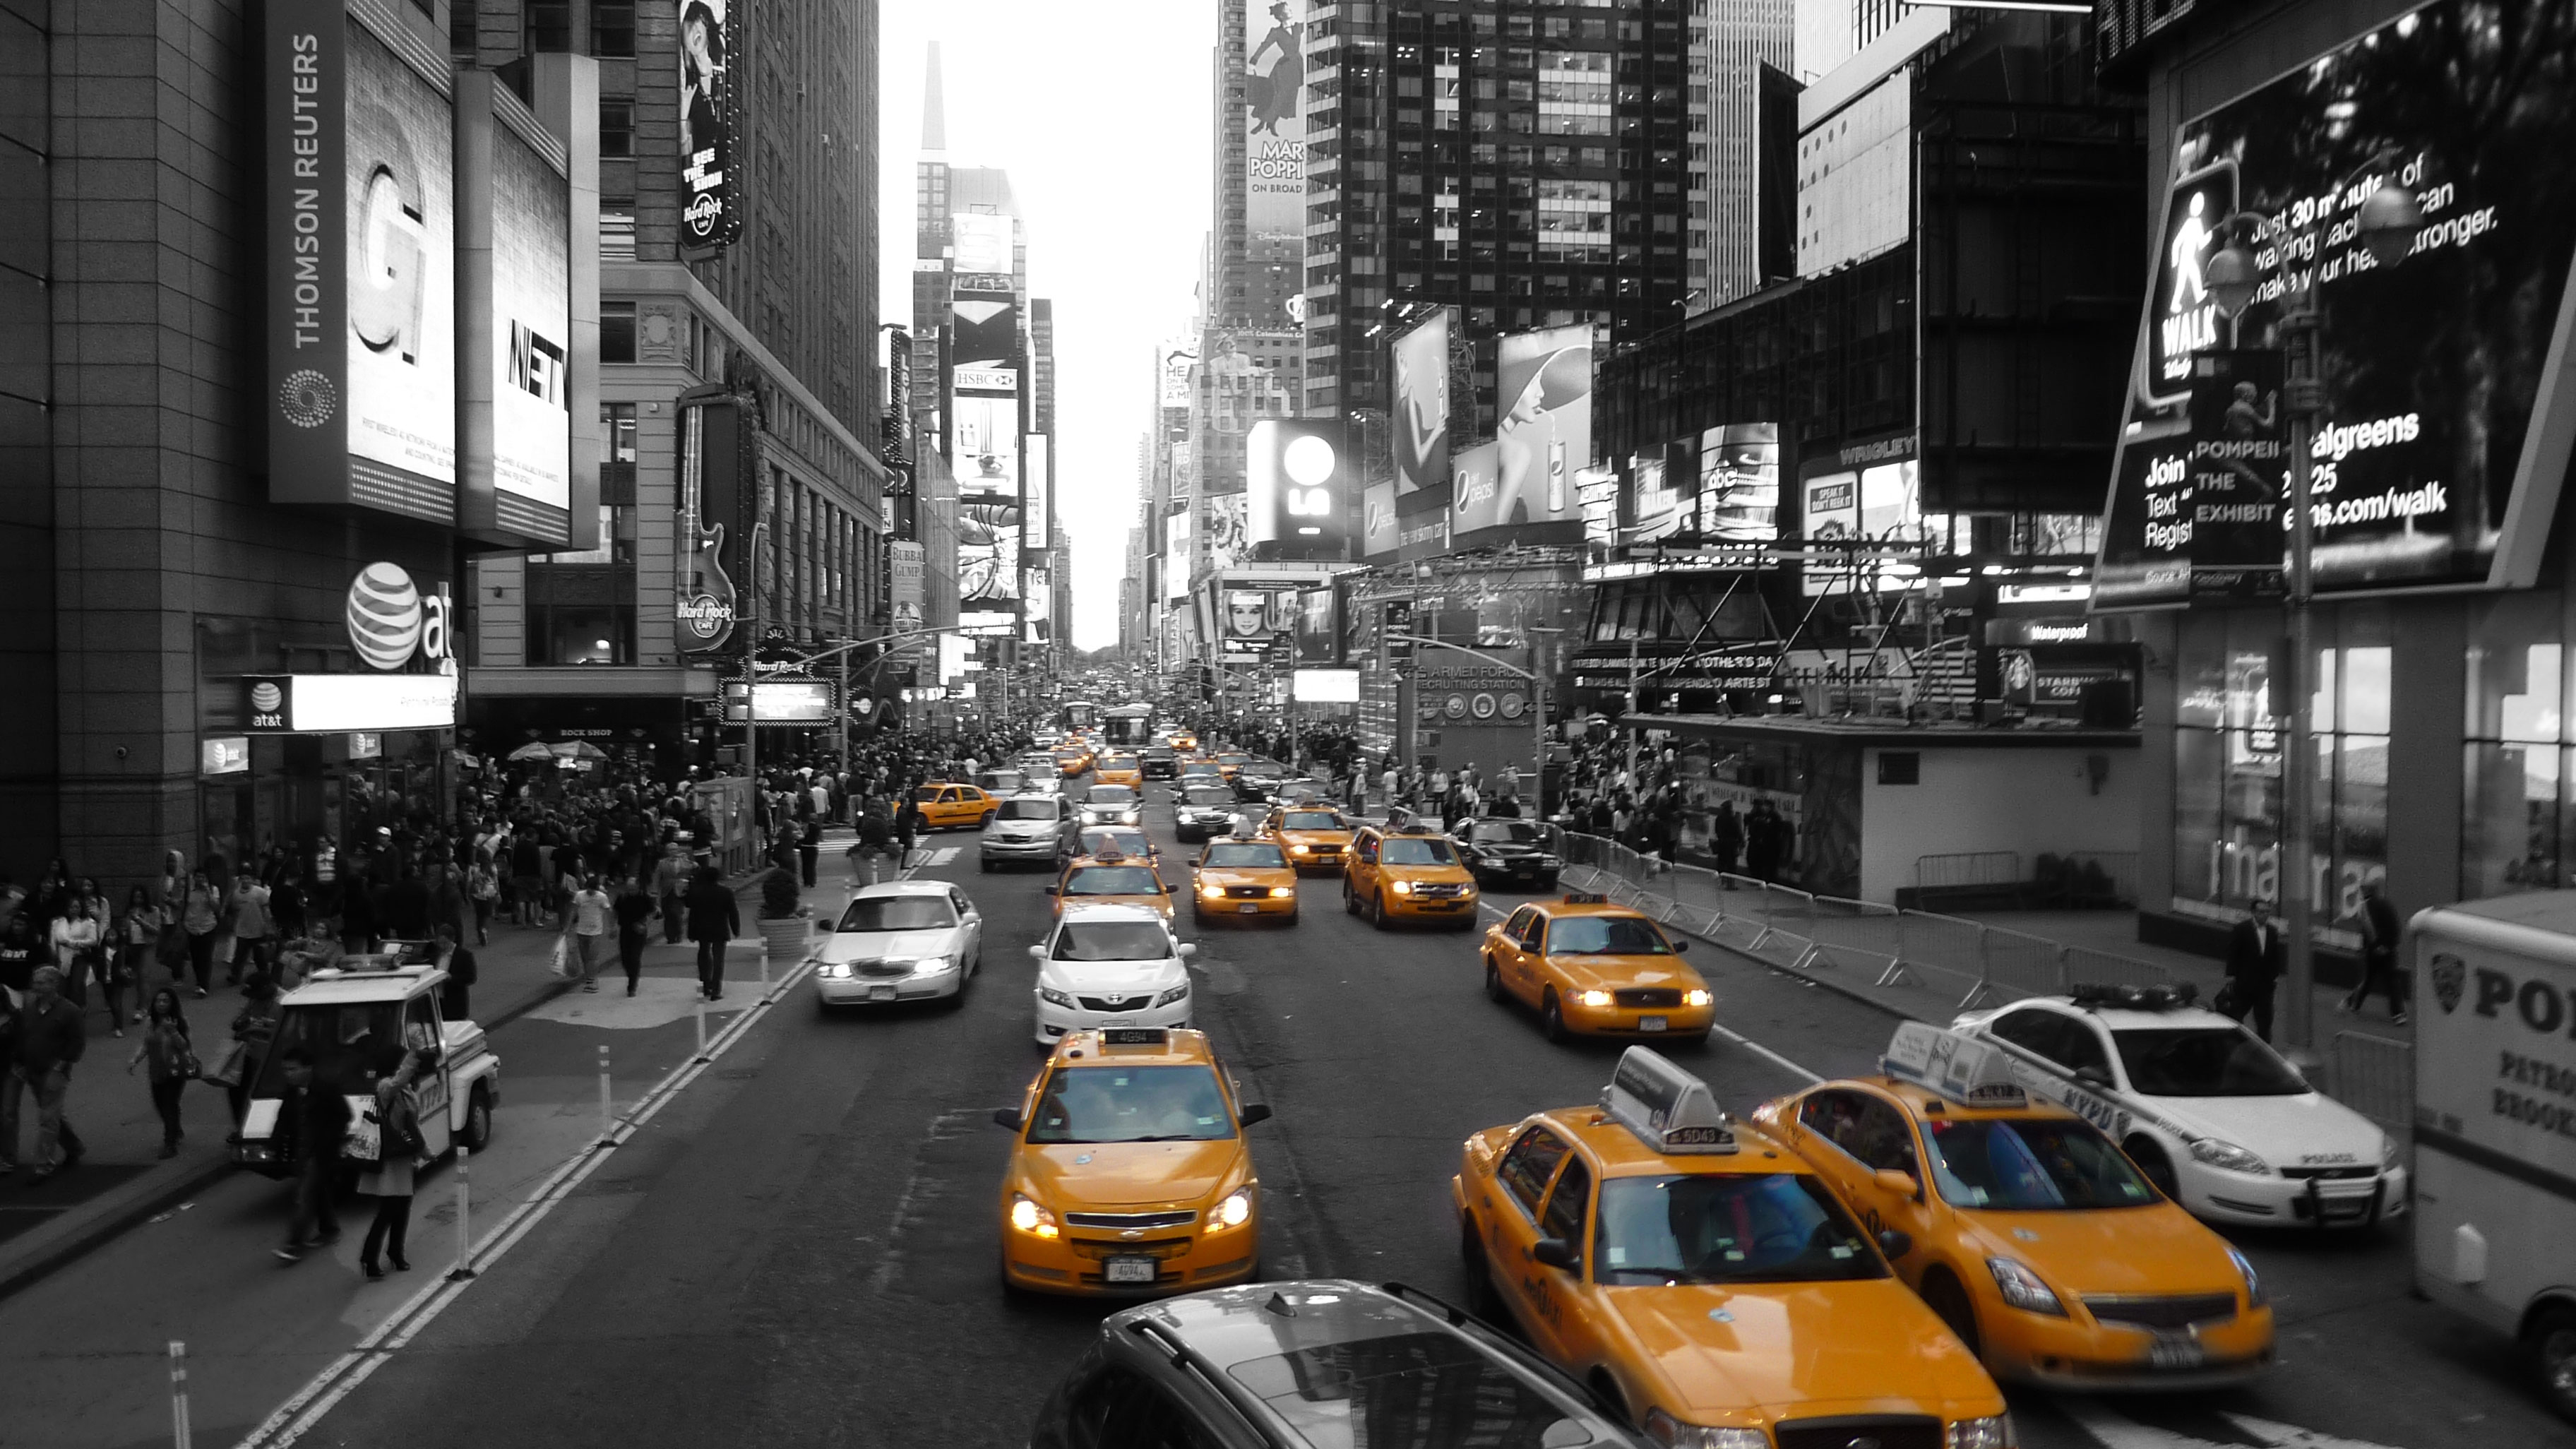 traffic, man made, selective color, cities, new york, city